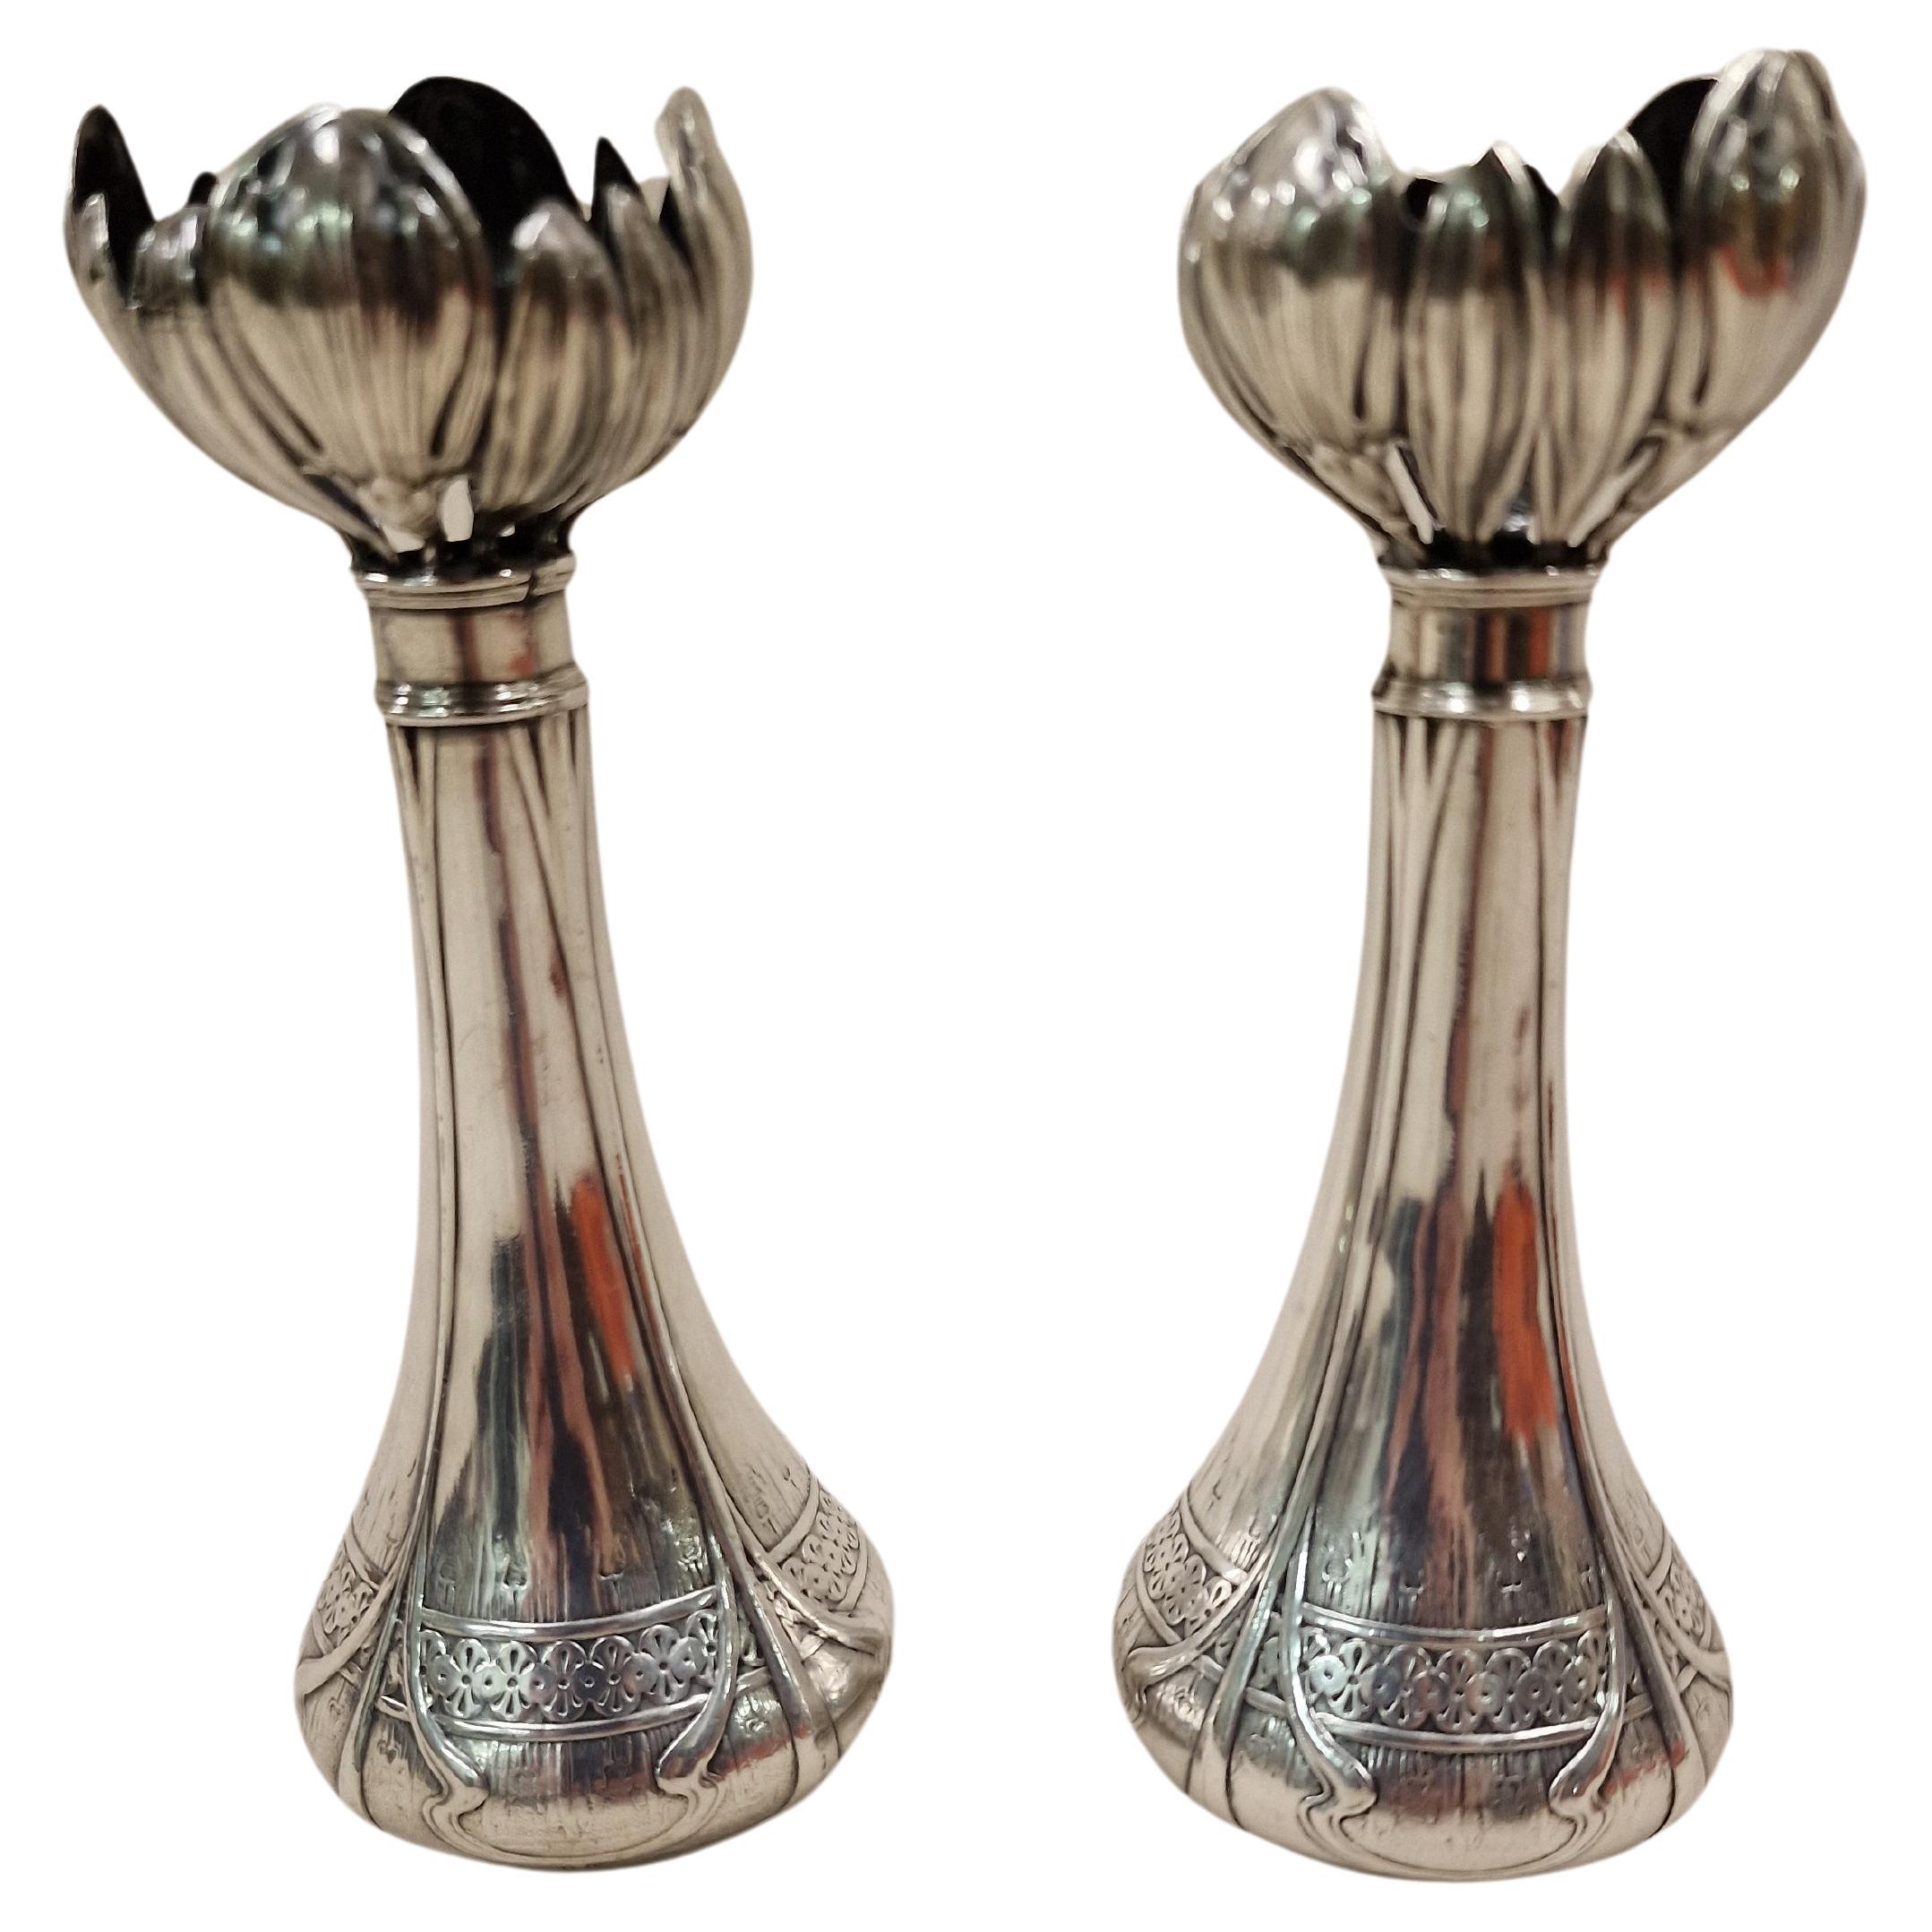 Extremly rare pair of flower vases of a wellknown traditional business, Broggi Milan, Italy, originals from the art nouveau period, made around 1900.

The vases have a round basic shape, which is bulbous at the bottom and tapers towards the top and